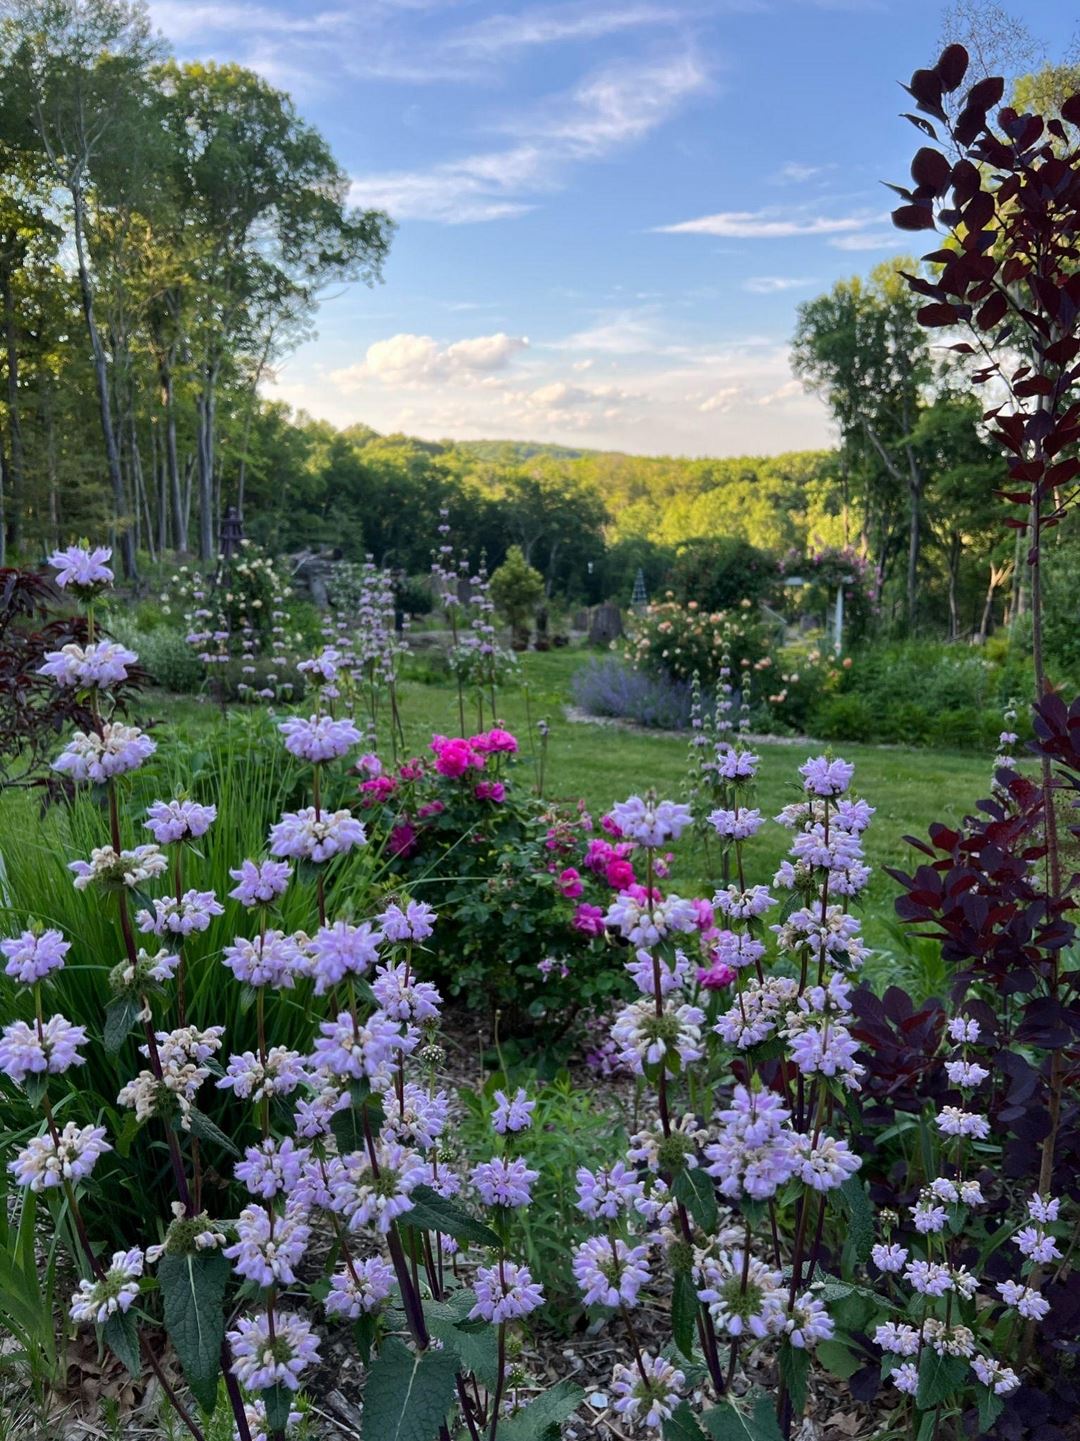 looking out onto the large backyard with purple and pink flowers in the foreground